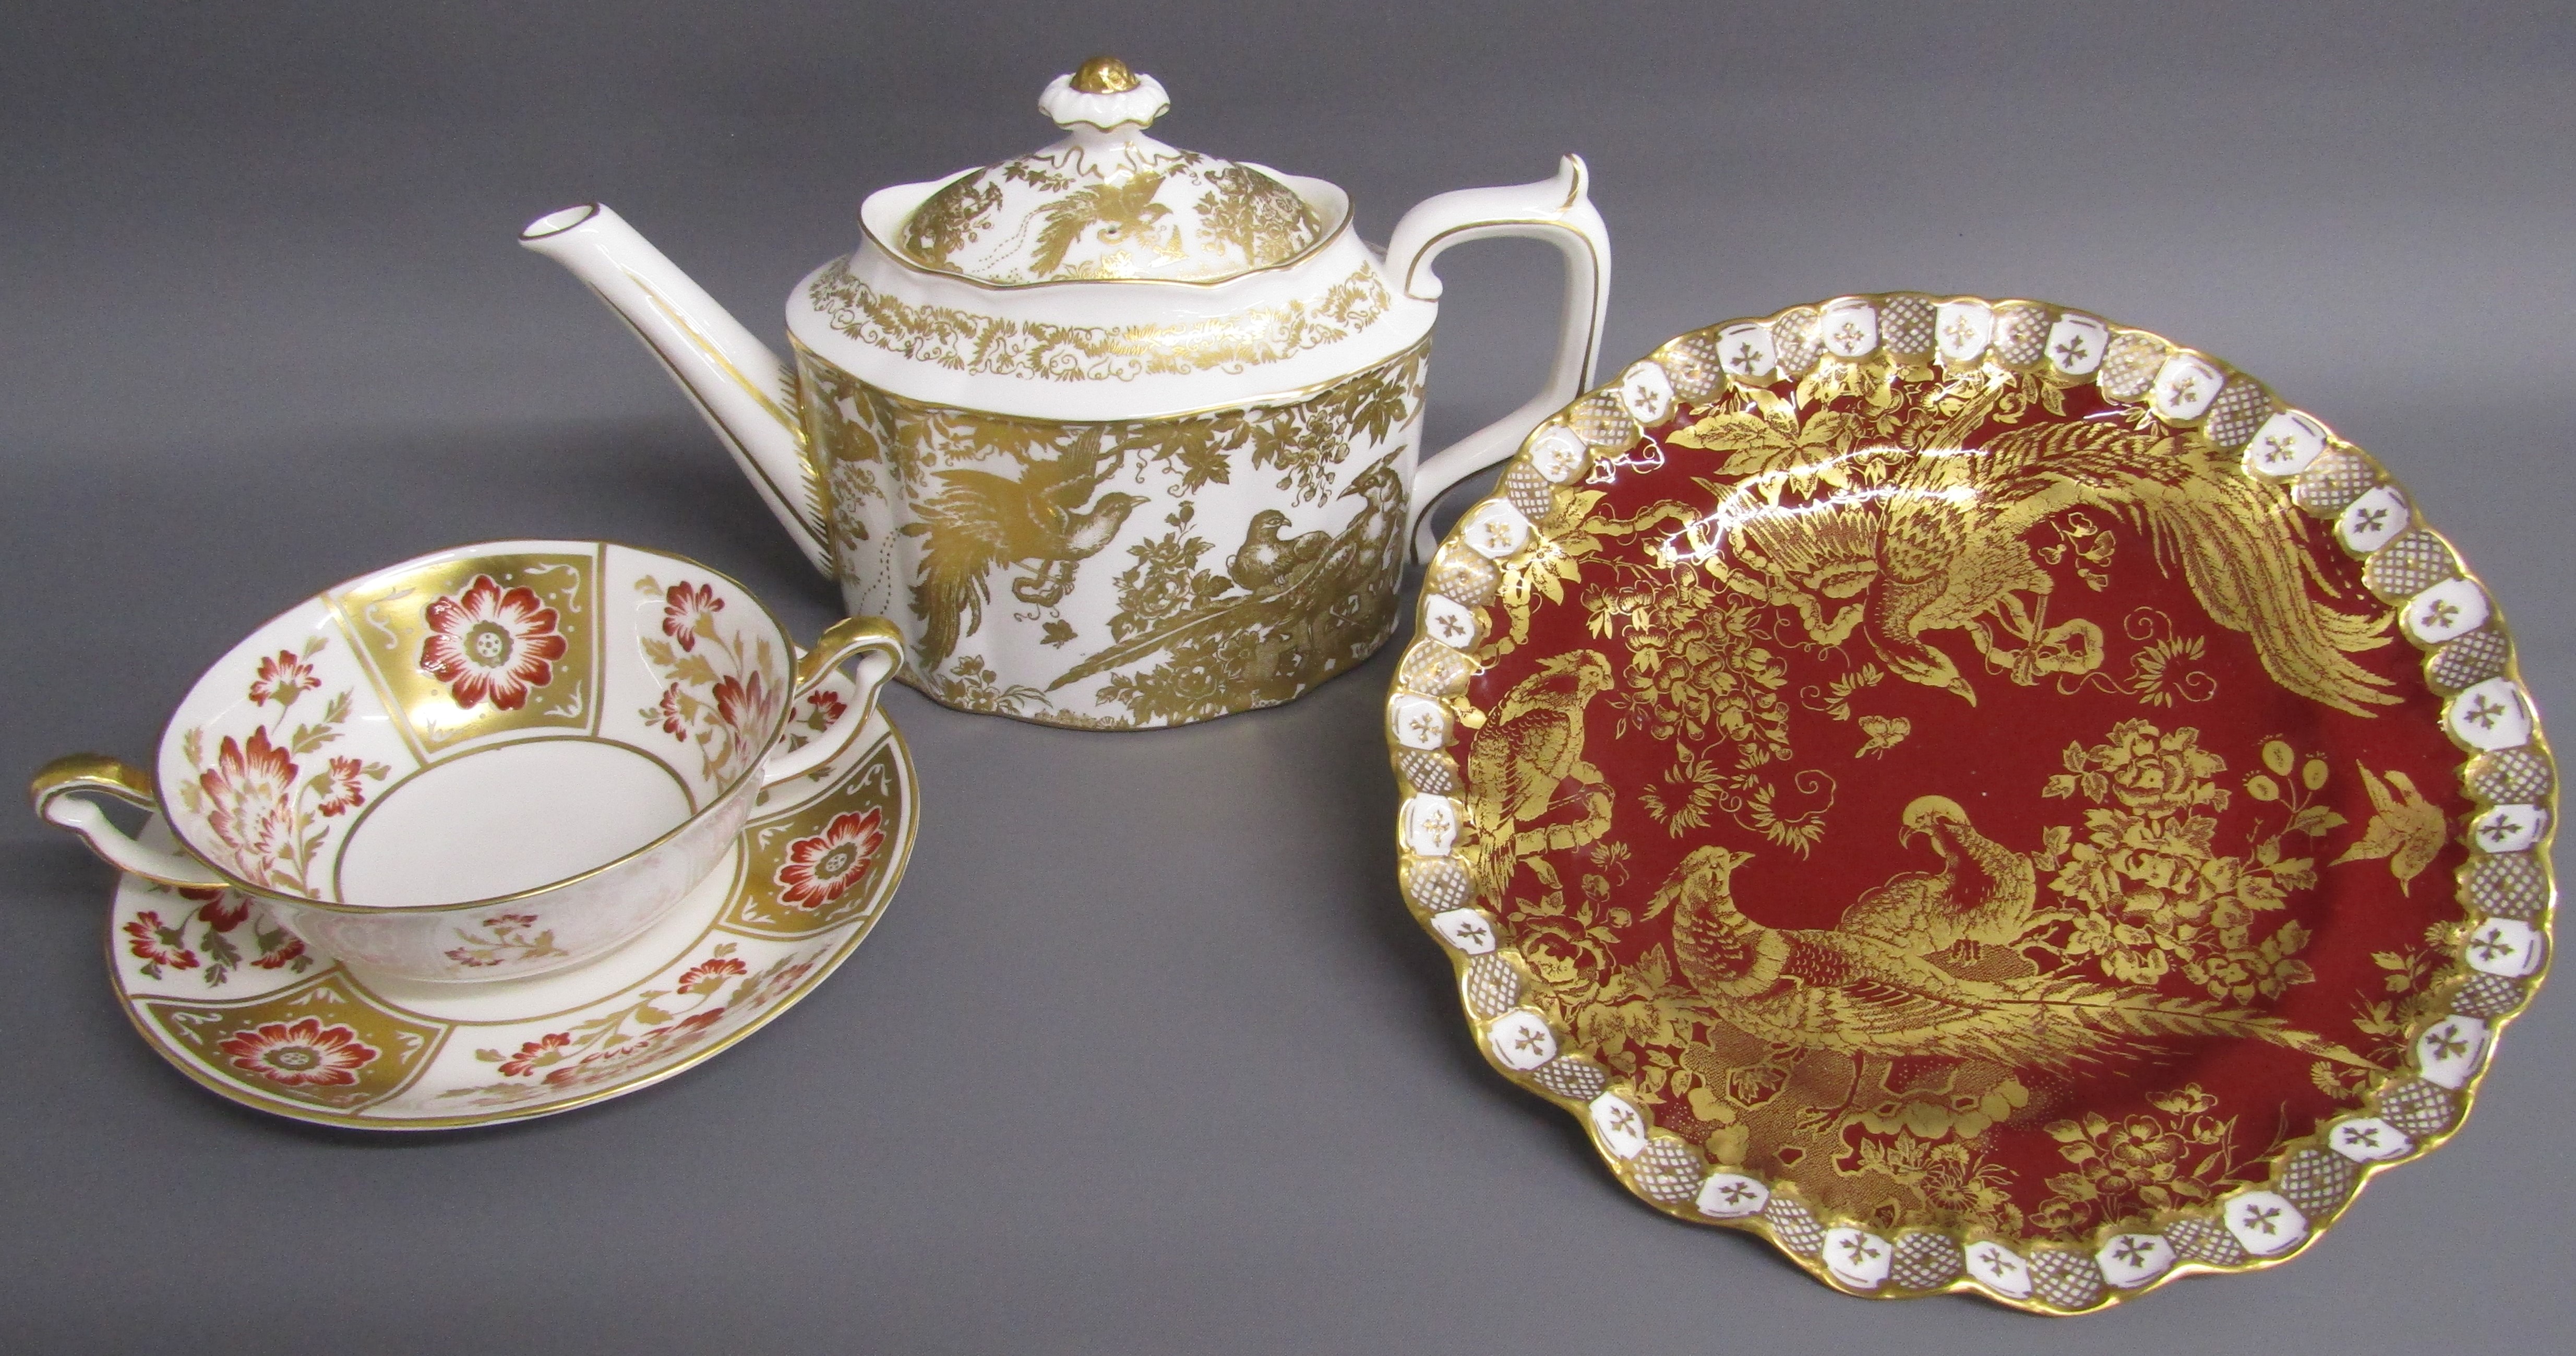 Royal Crown Derby 'Gold Aves' teapot, 'Red Derby Panel' soup bowl and saucer and red and gold